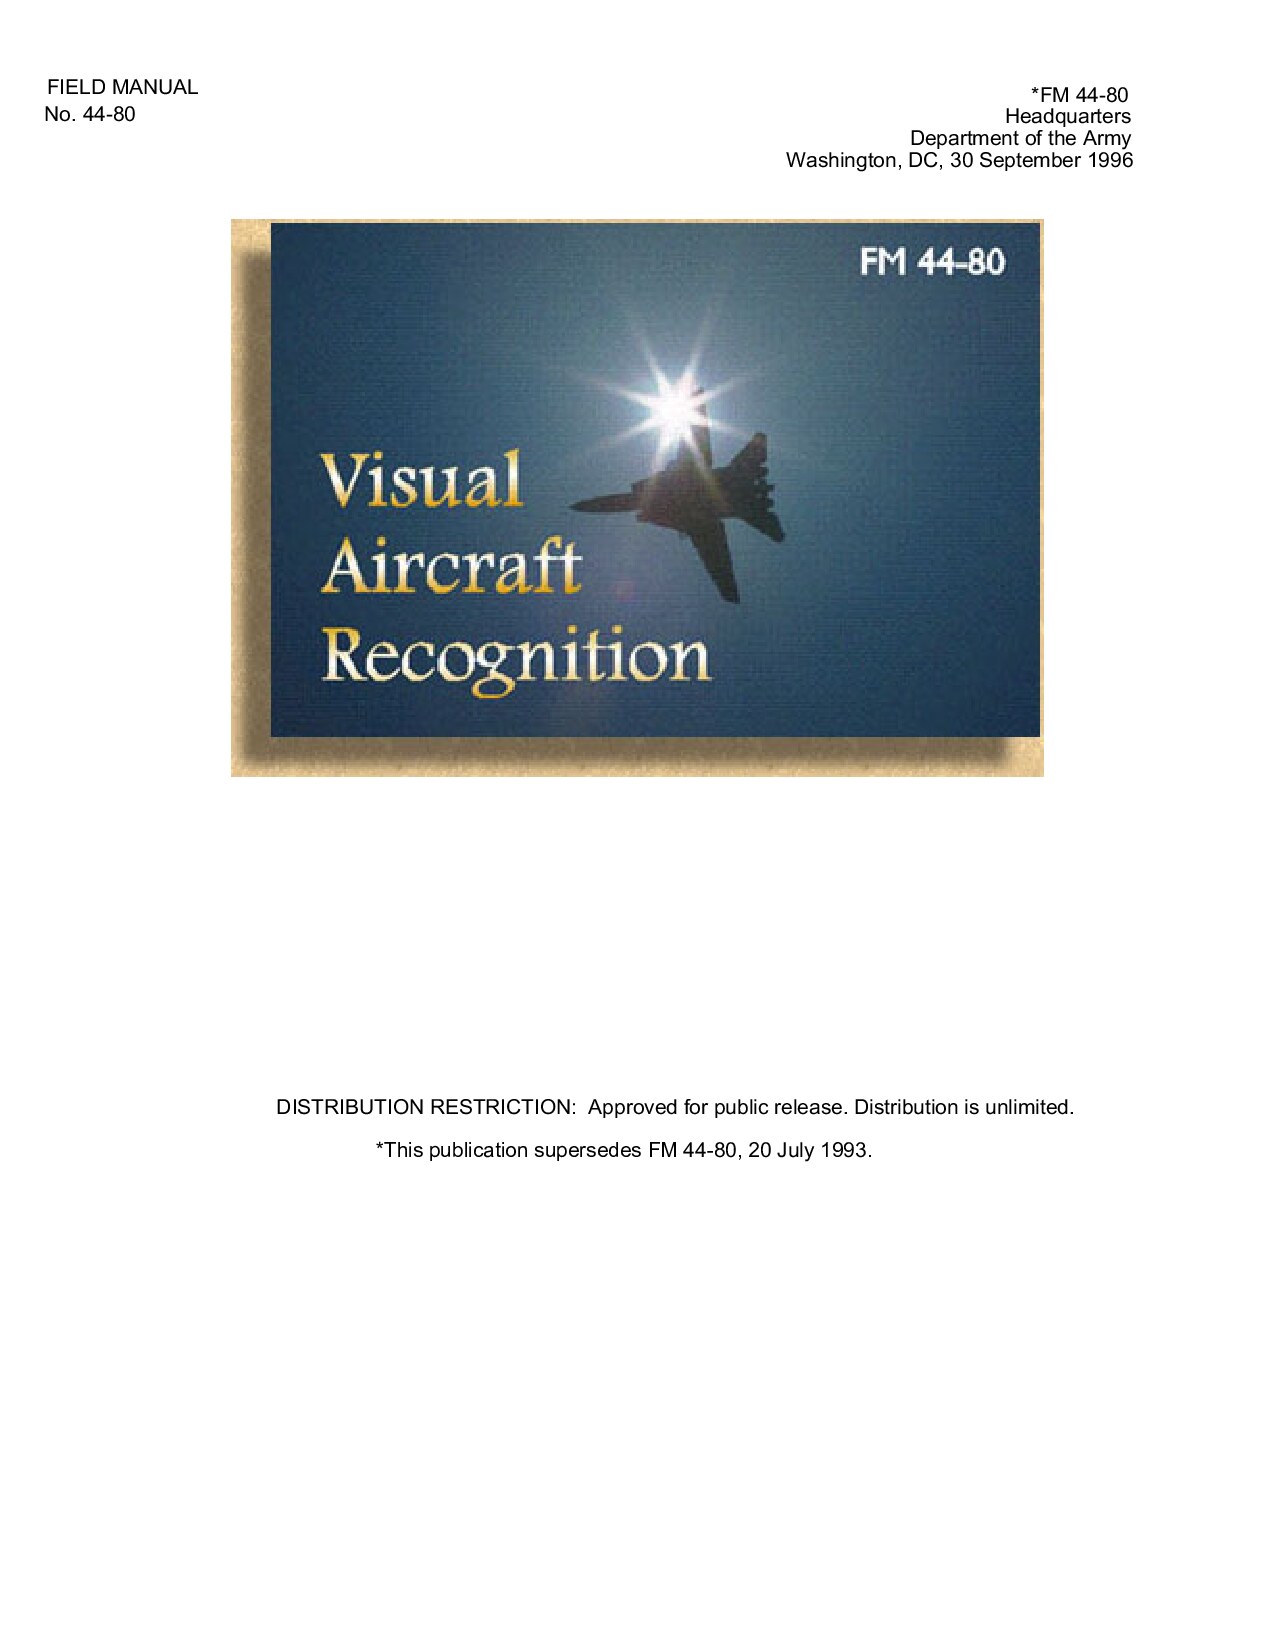 Visual Aircraft Recognition